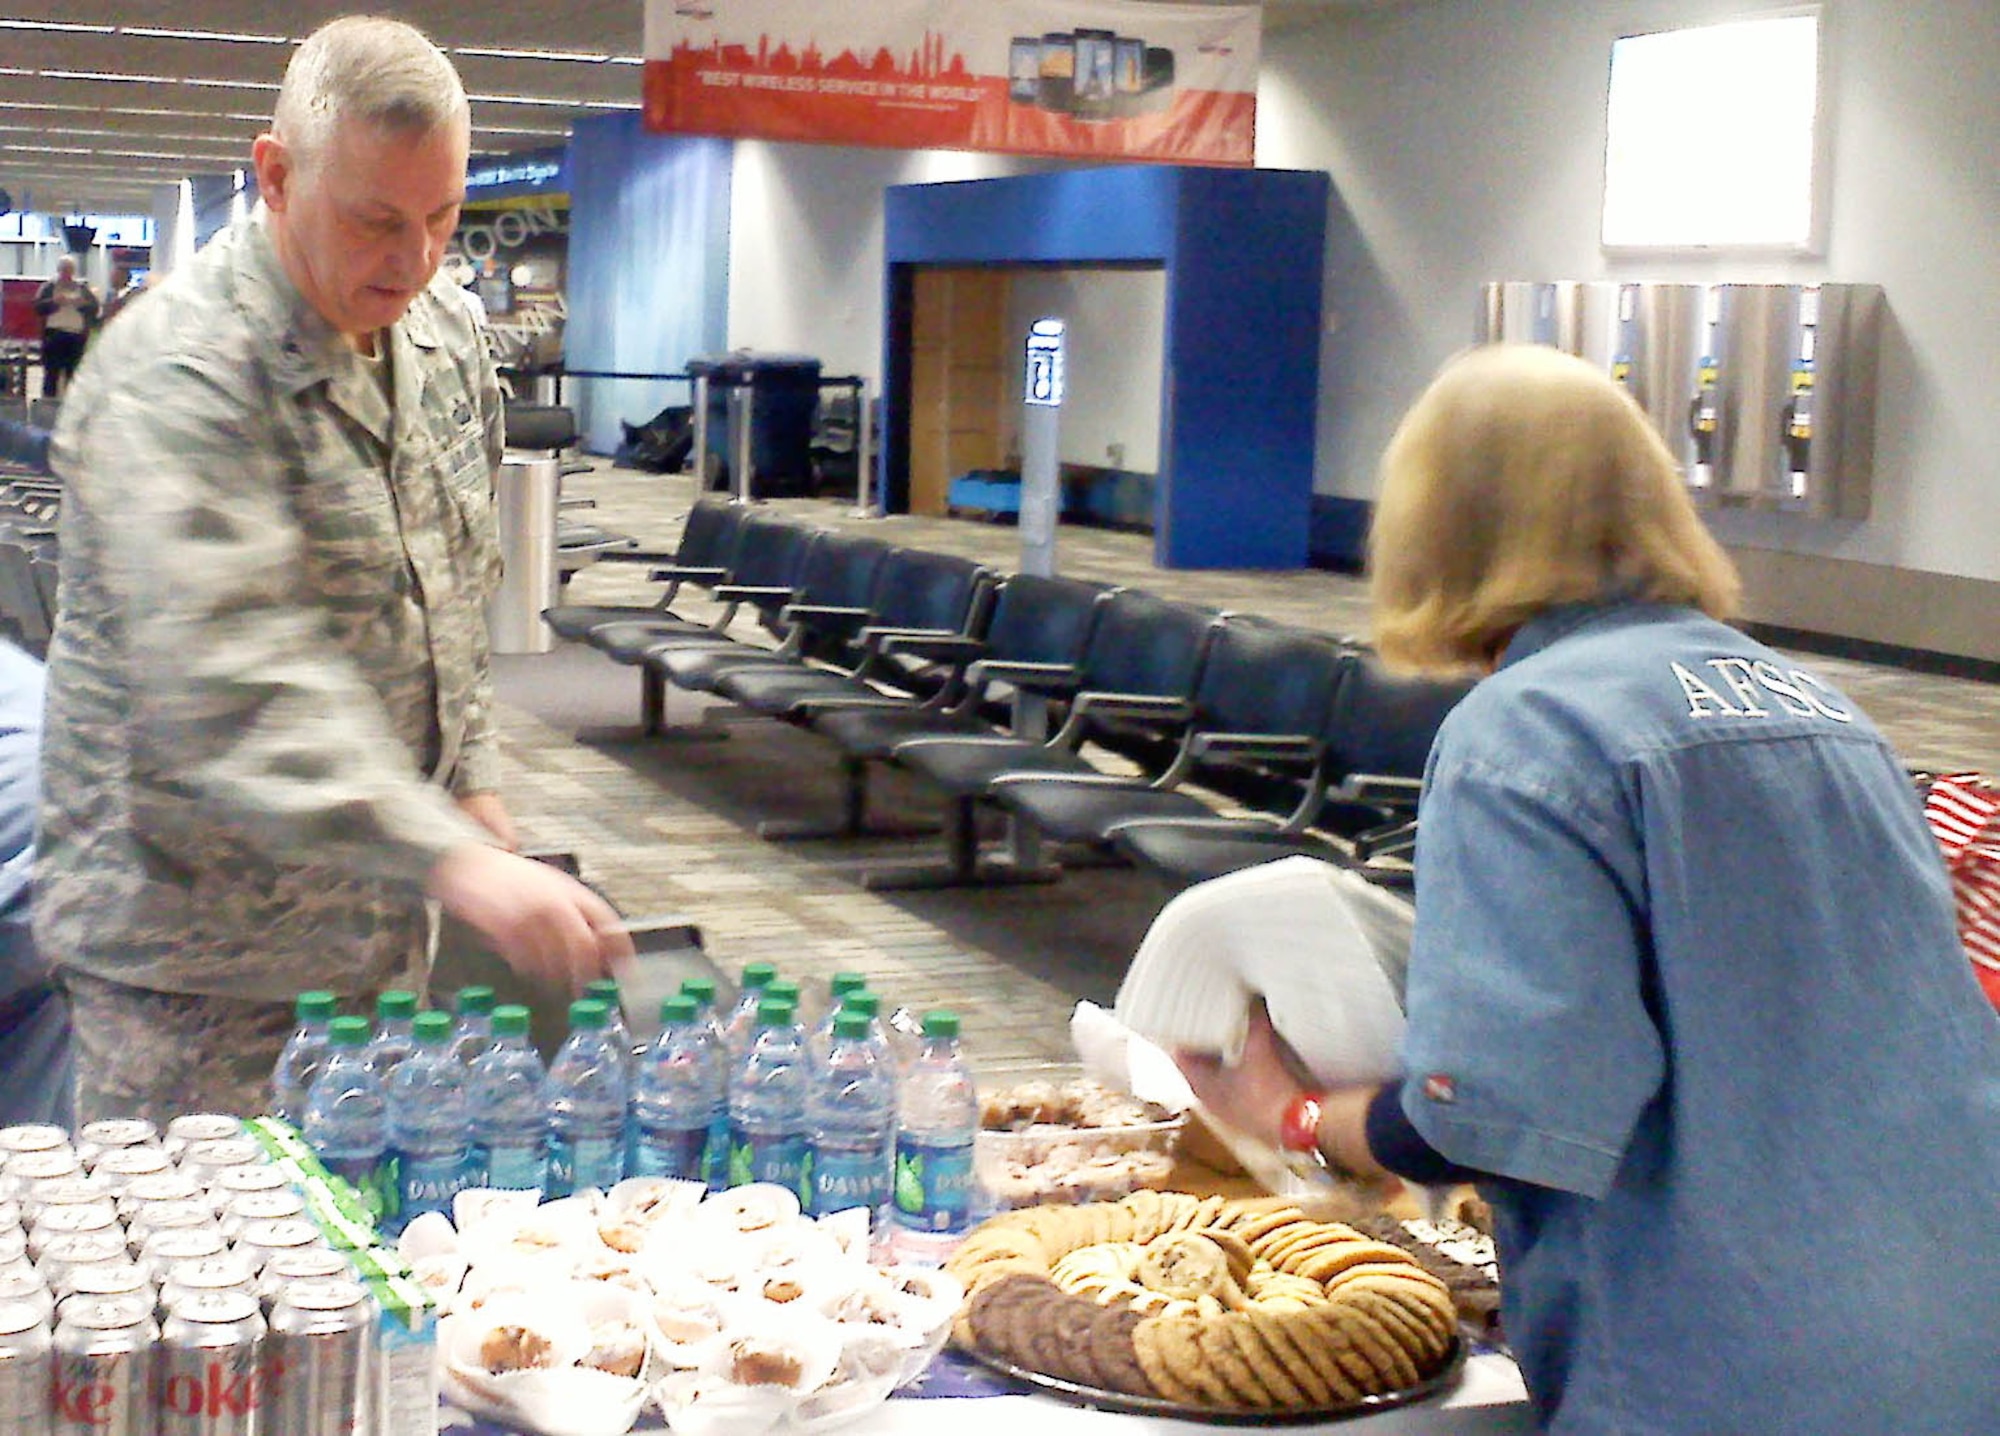 Col. Michael Ochs, 934th Mission Support Group commander, helps an Armed Forces Service Center volunteer set up refreshments for distinguished visitors at the Minneapolis-St. Paul International Airport.  The AFSC at the airport is open to active, guard and reserve members from all service branches. (Air Force photo/Capt. S.J. Brown)